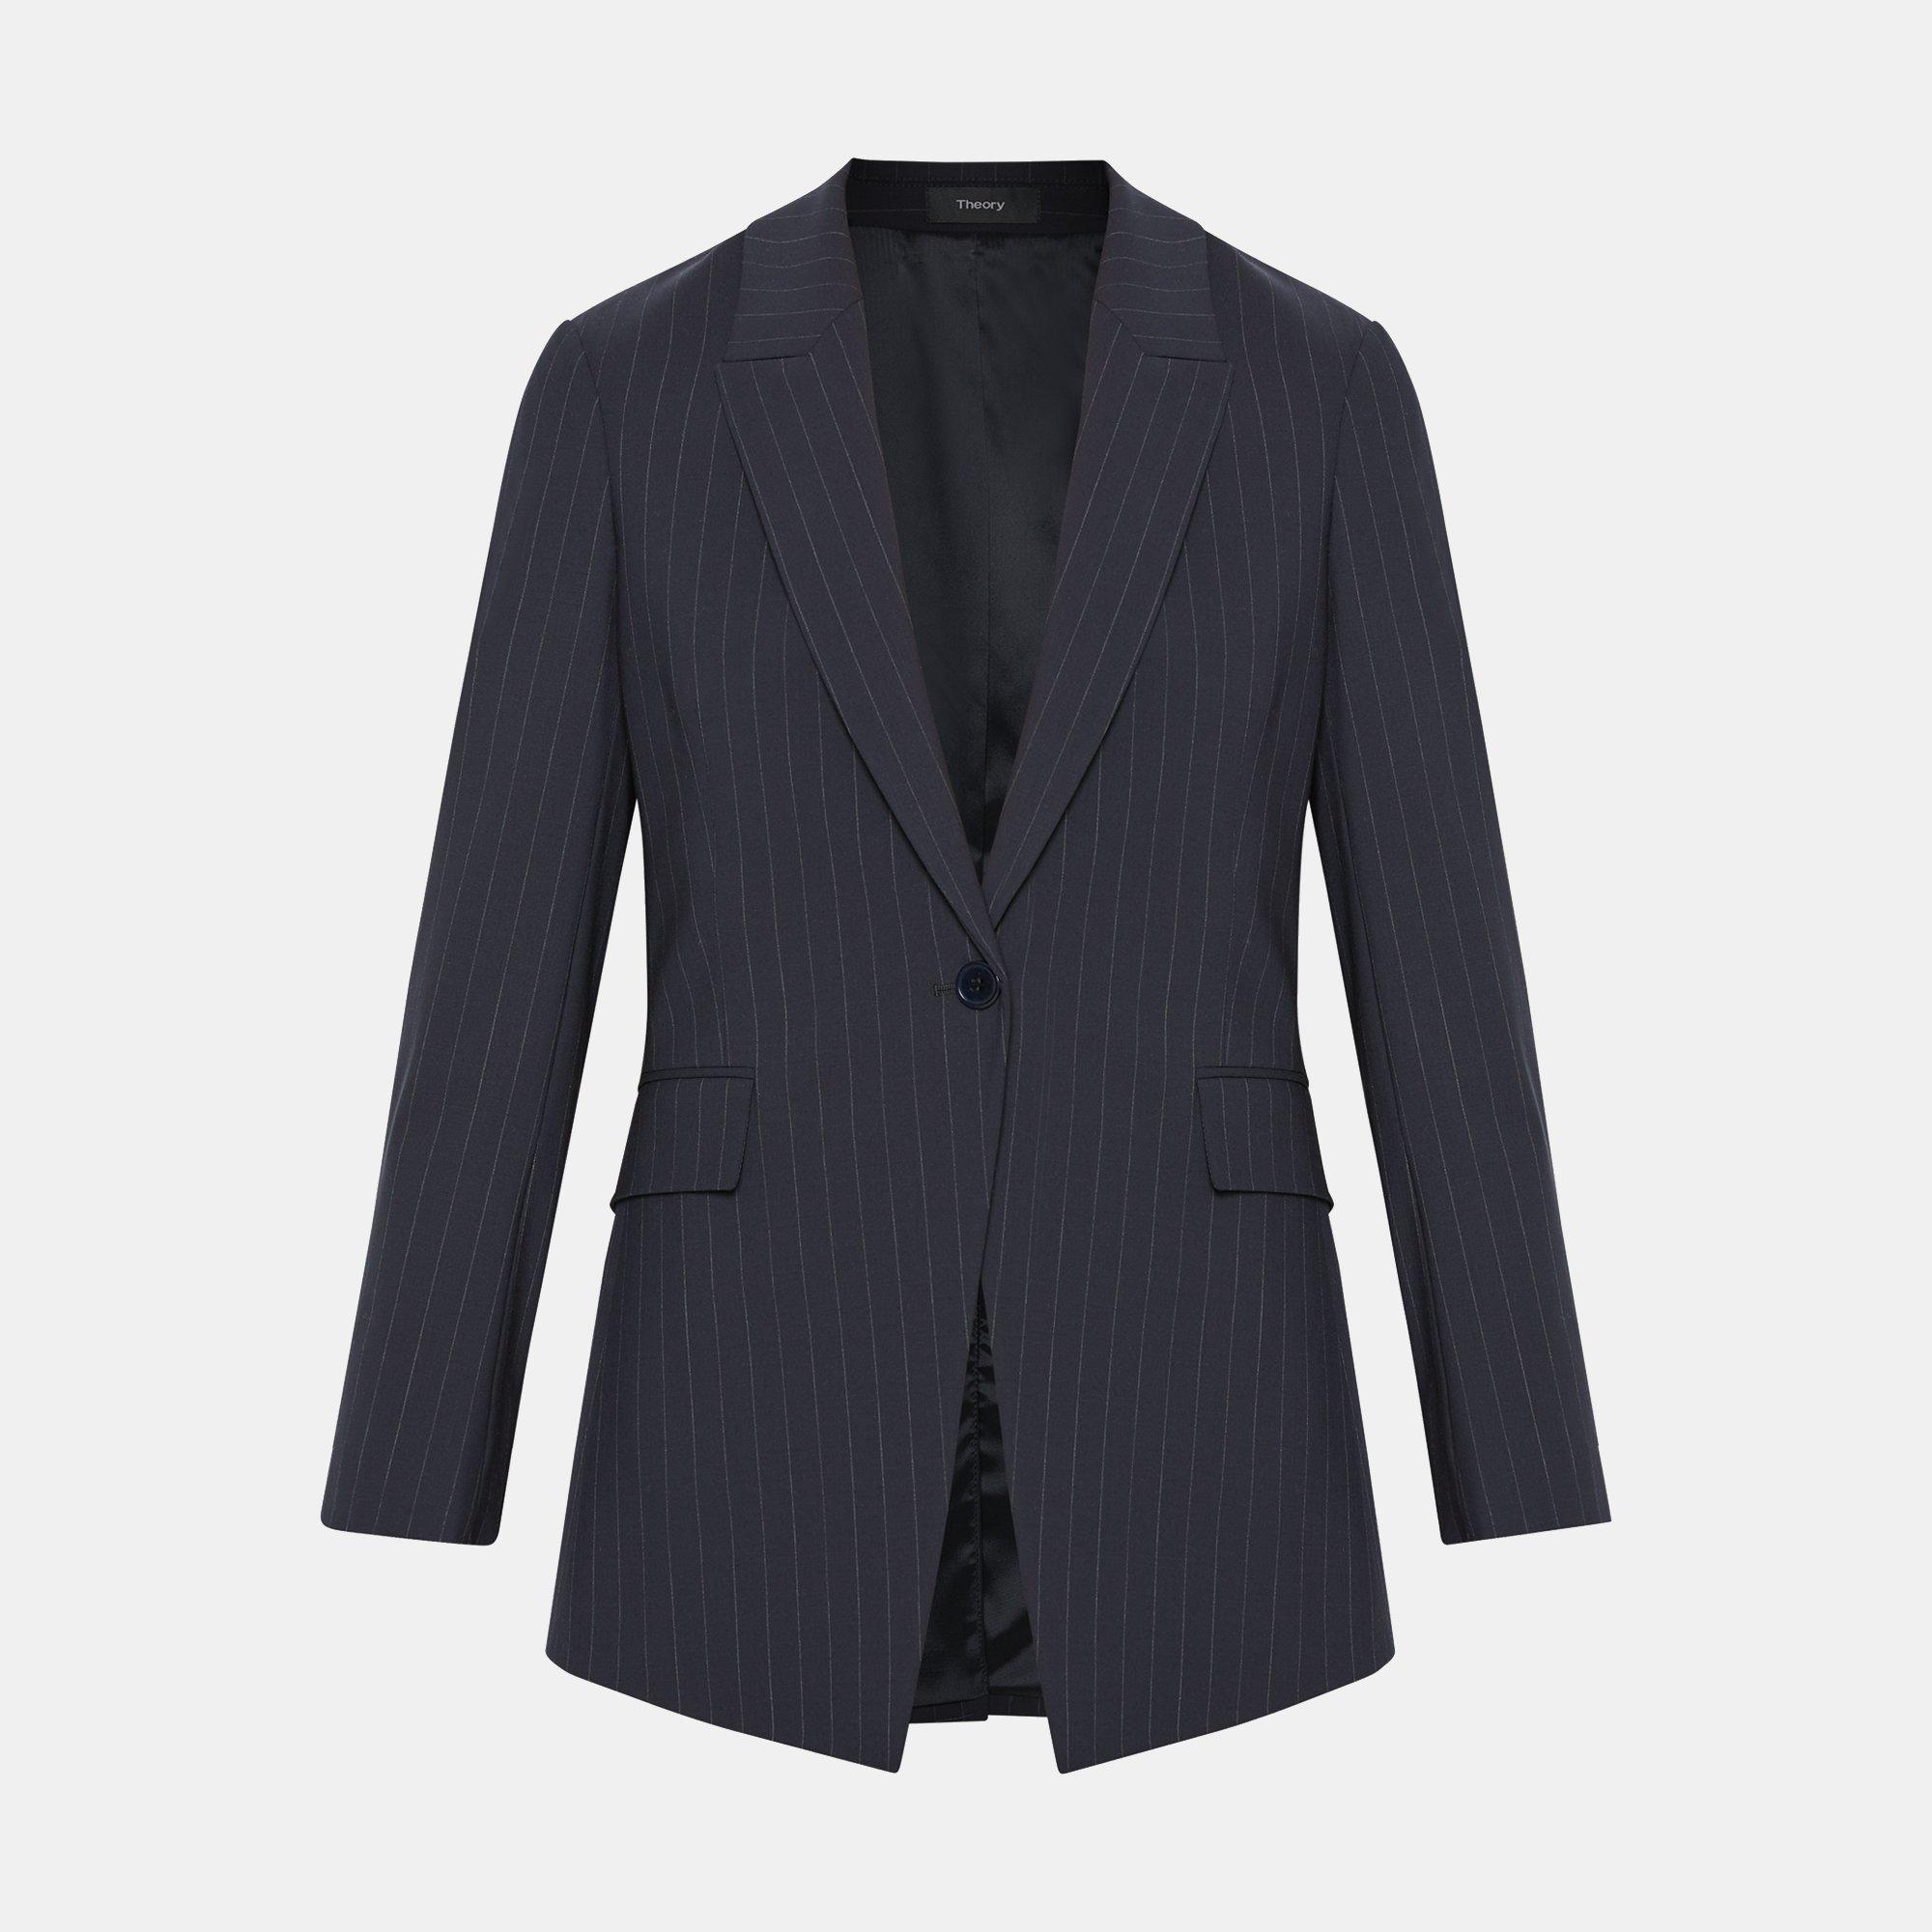 Theory Official Site  Etiennette Blazer in Pinstripe Good Wool